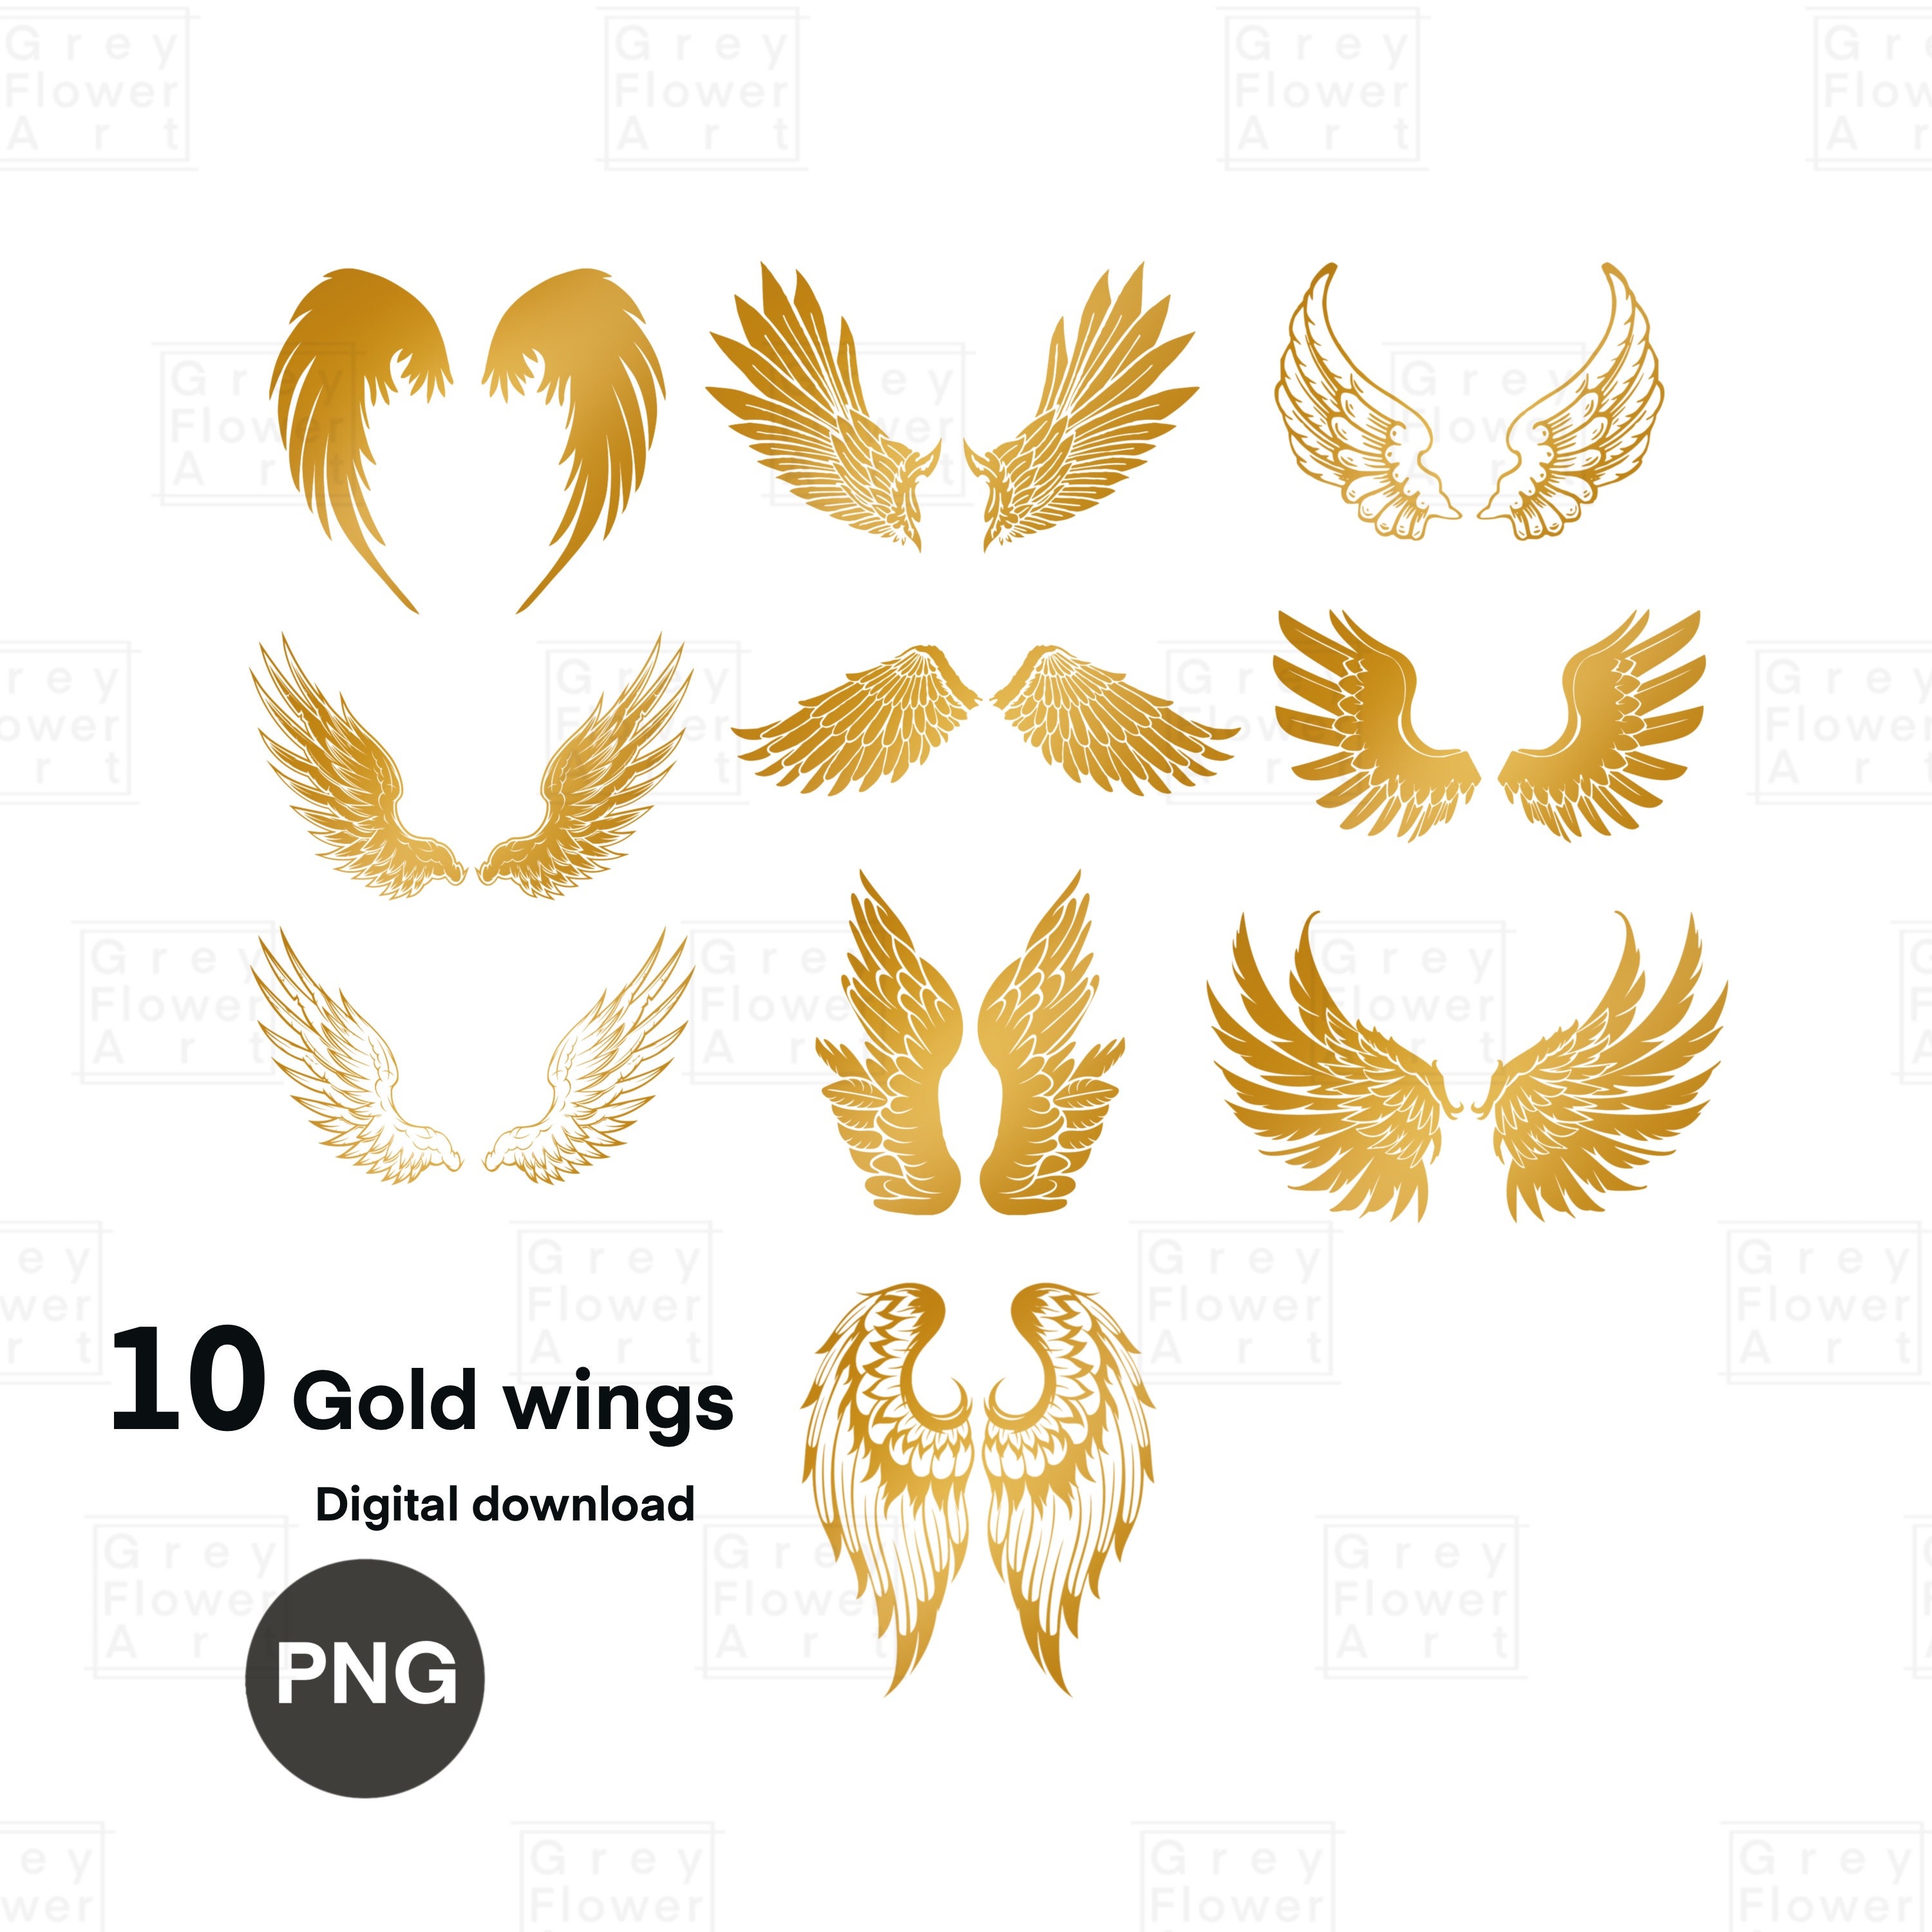 Golden Angel Wings – free PNG-files and printables – Wings of Whimsy